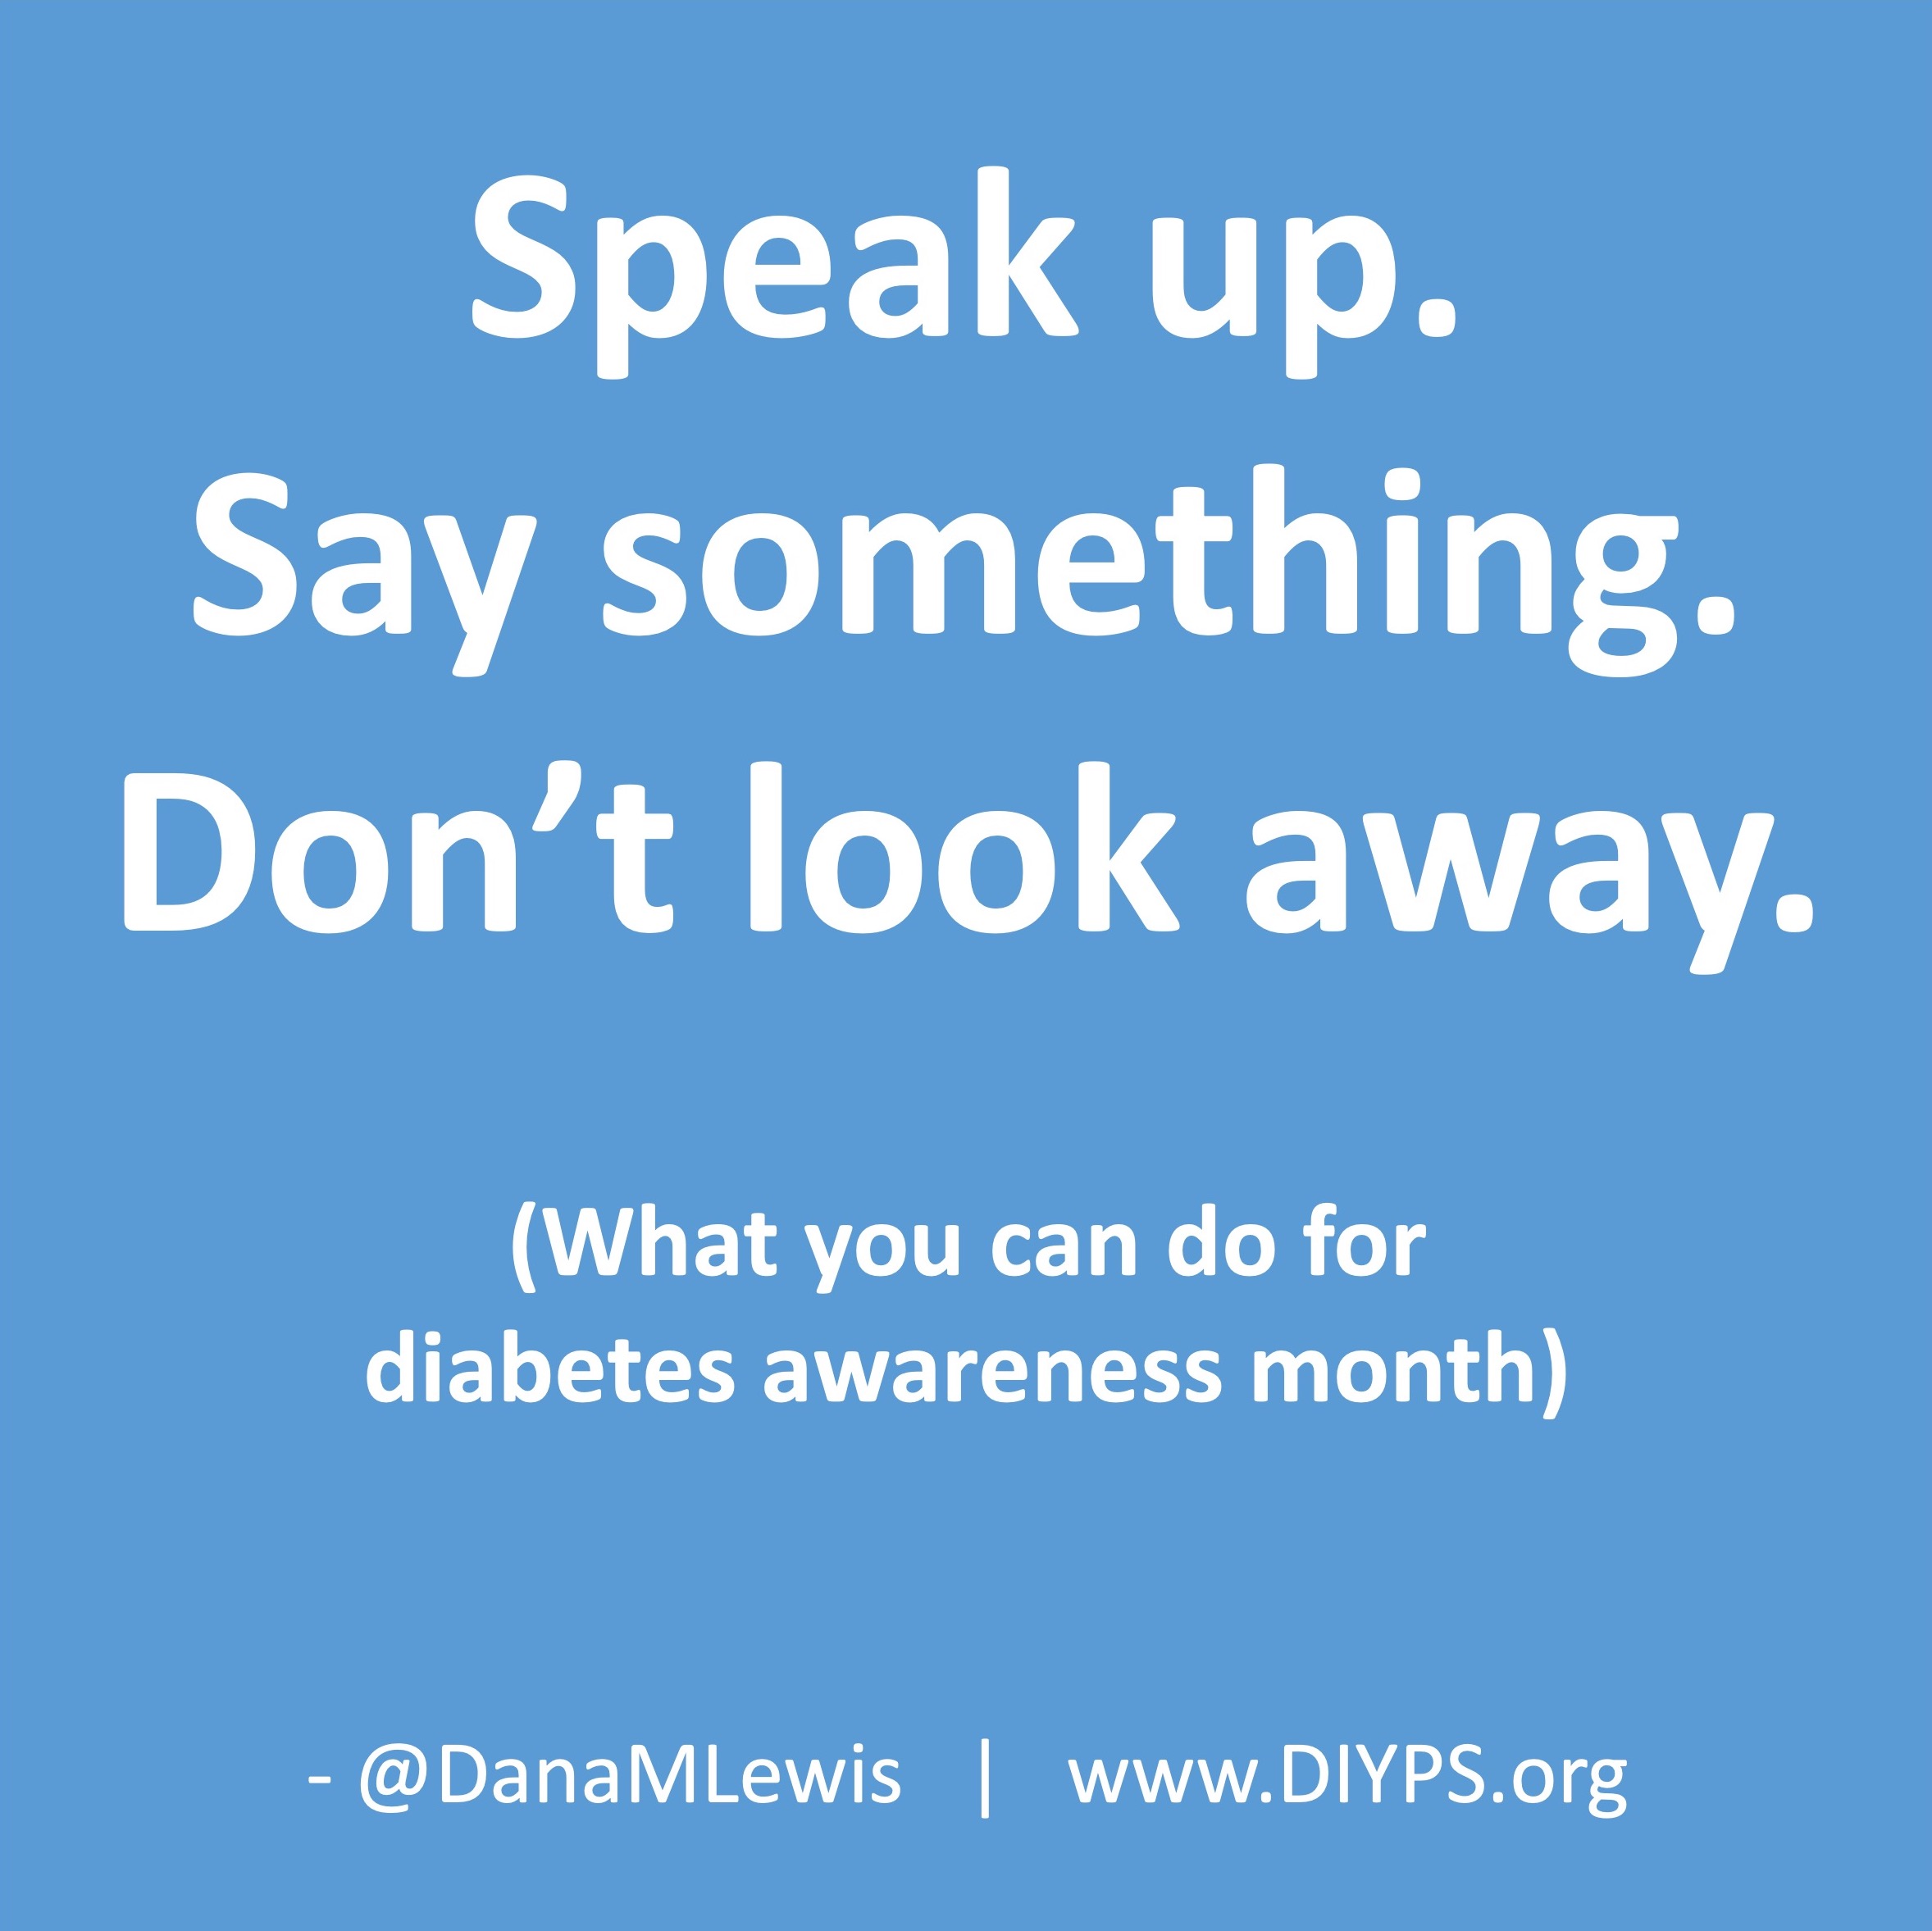 Speak up. Say something. Don't look away. These are things you can do for diabetes awareness month.